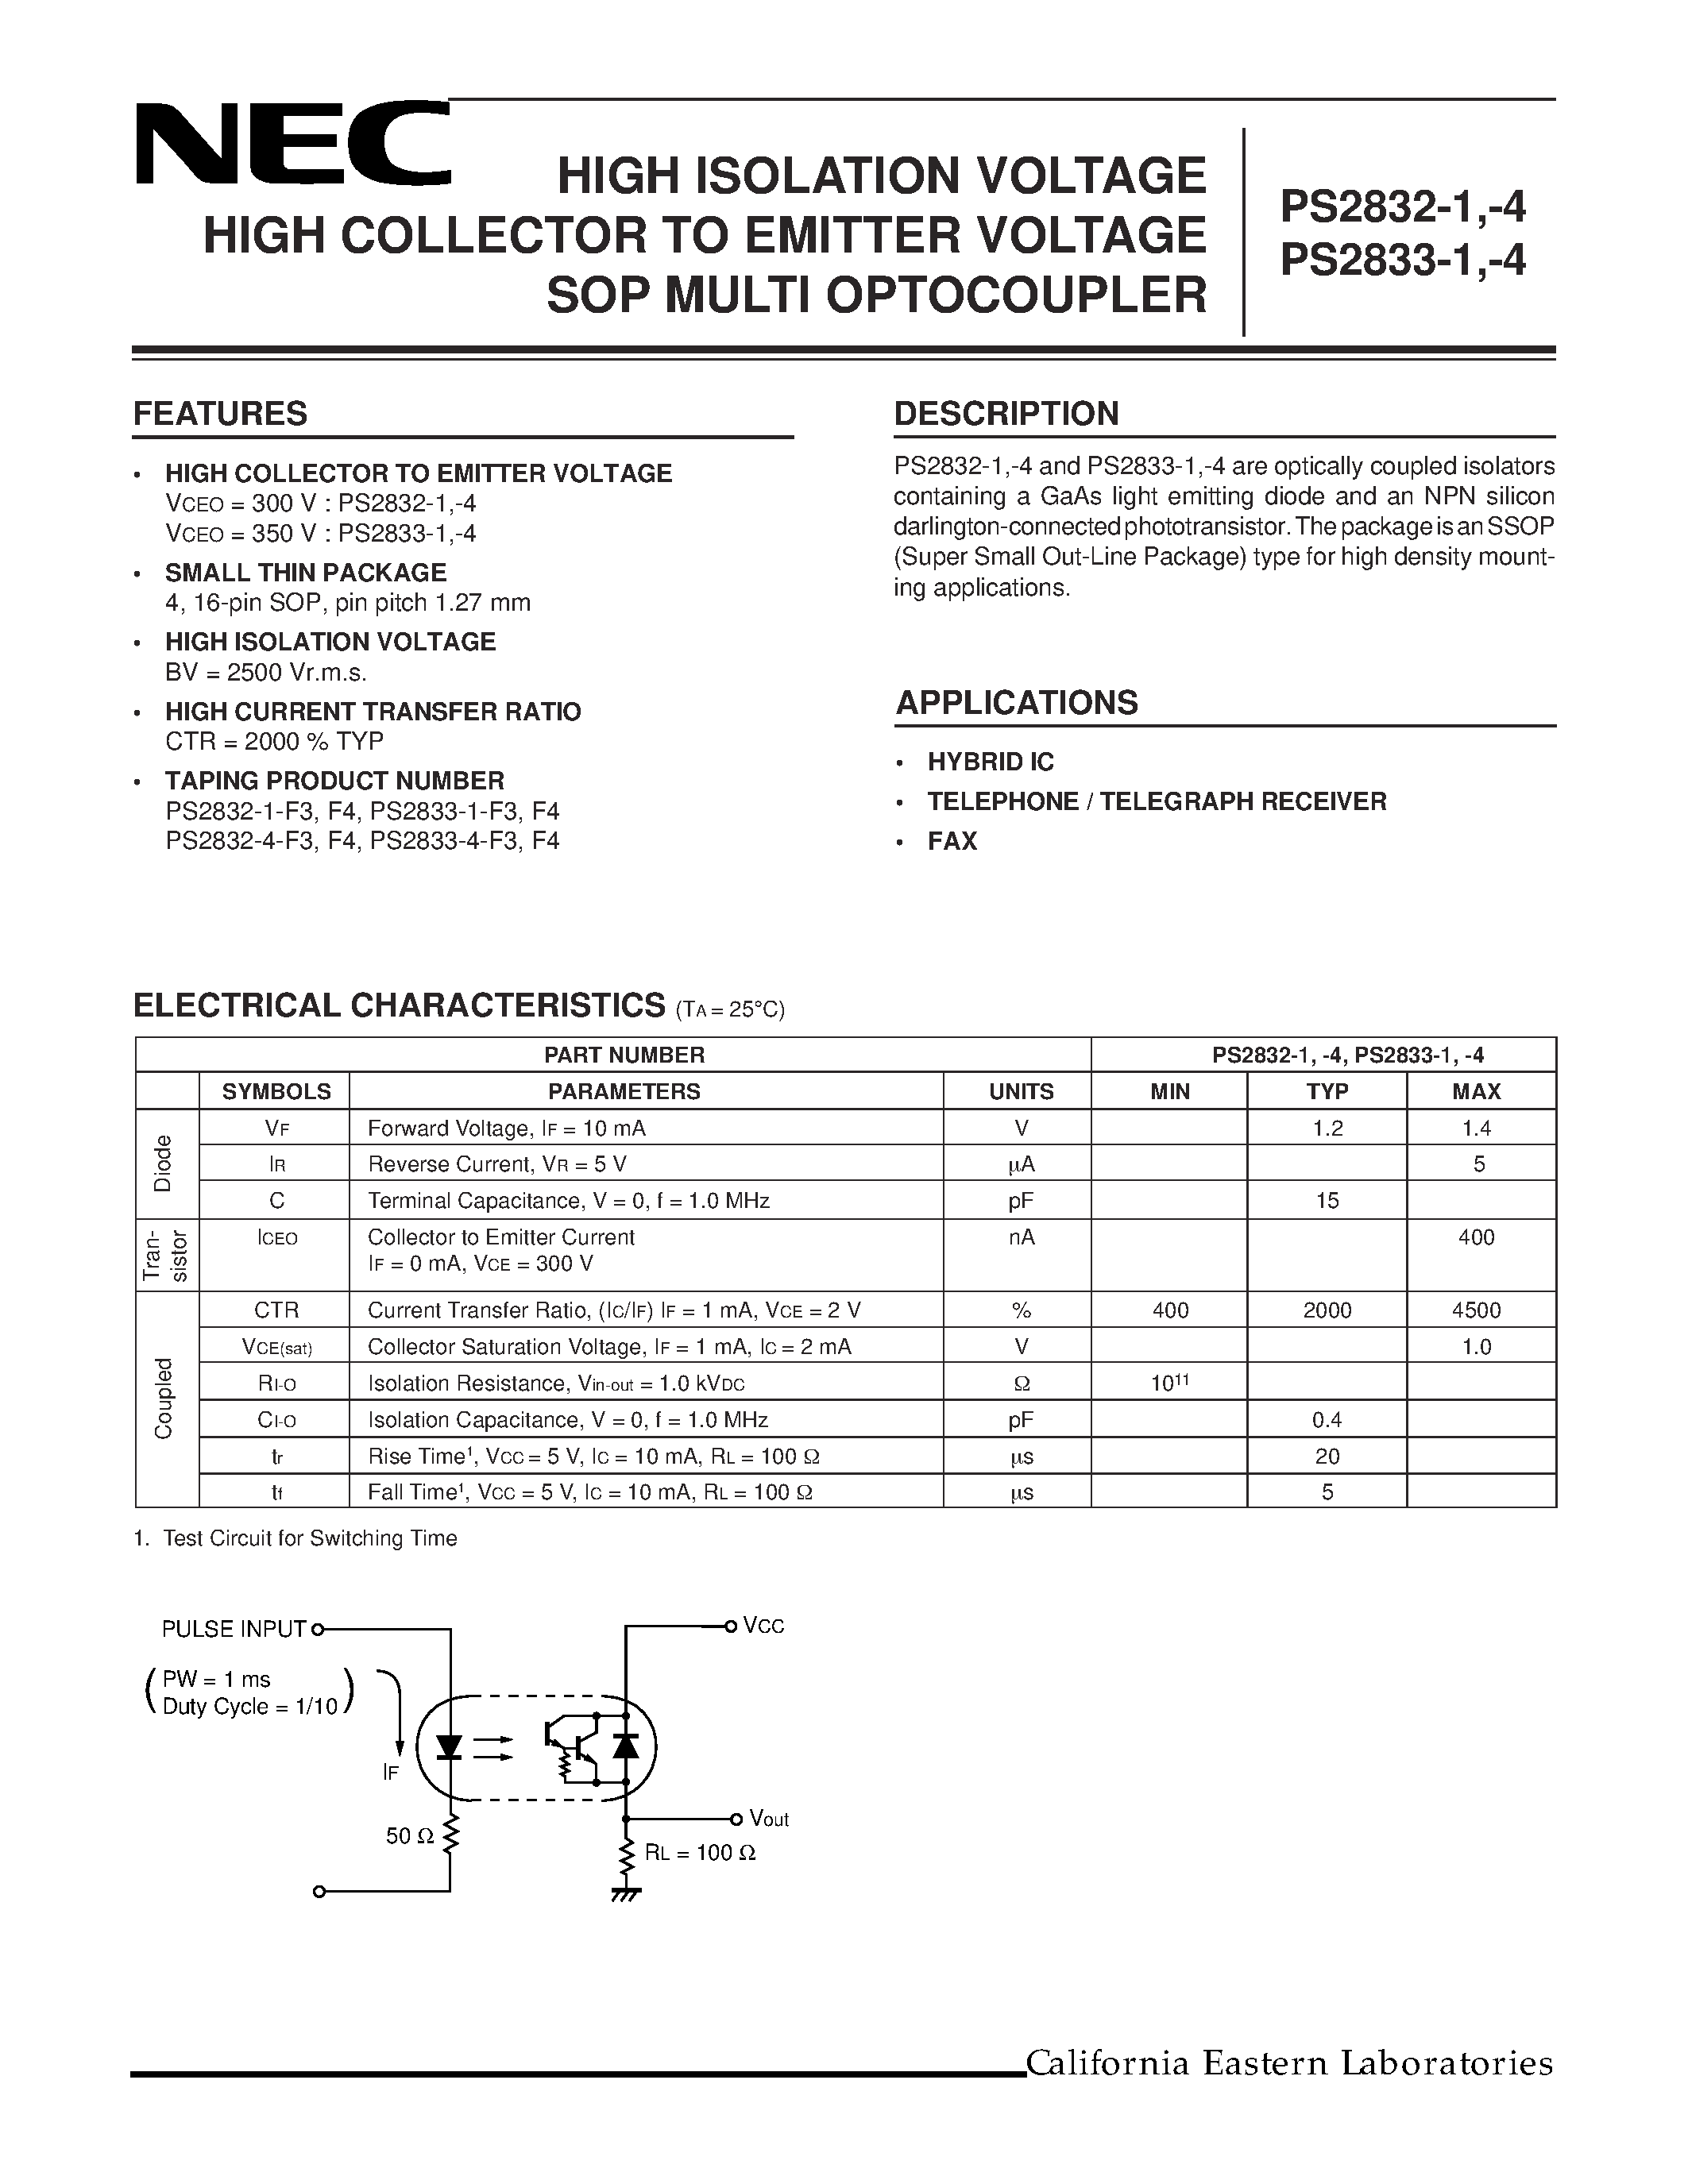 Даташит PS2833-1-V-F3 - HIGH ISOLATION VOLTAGE HIGH COLLECTOR TO EMITTER VOLTAGE SOP MULTI OPTOCOUPLER страница 1